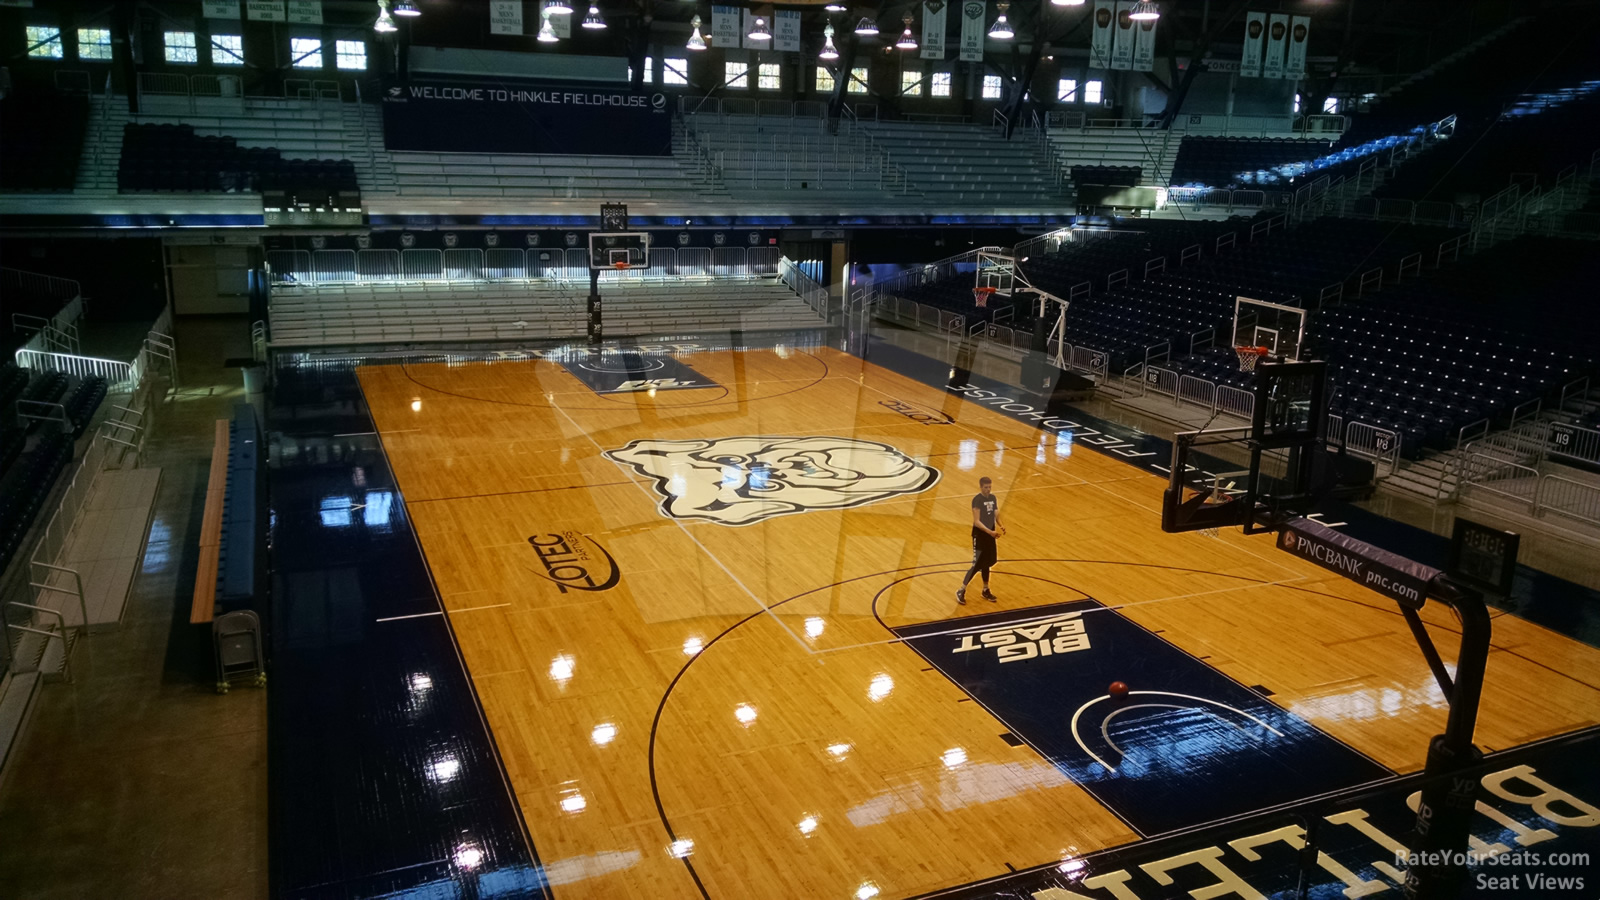 section 201, row 3 seat view  - hinkle fieldhouse